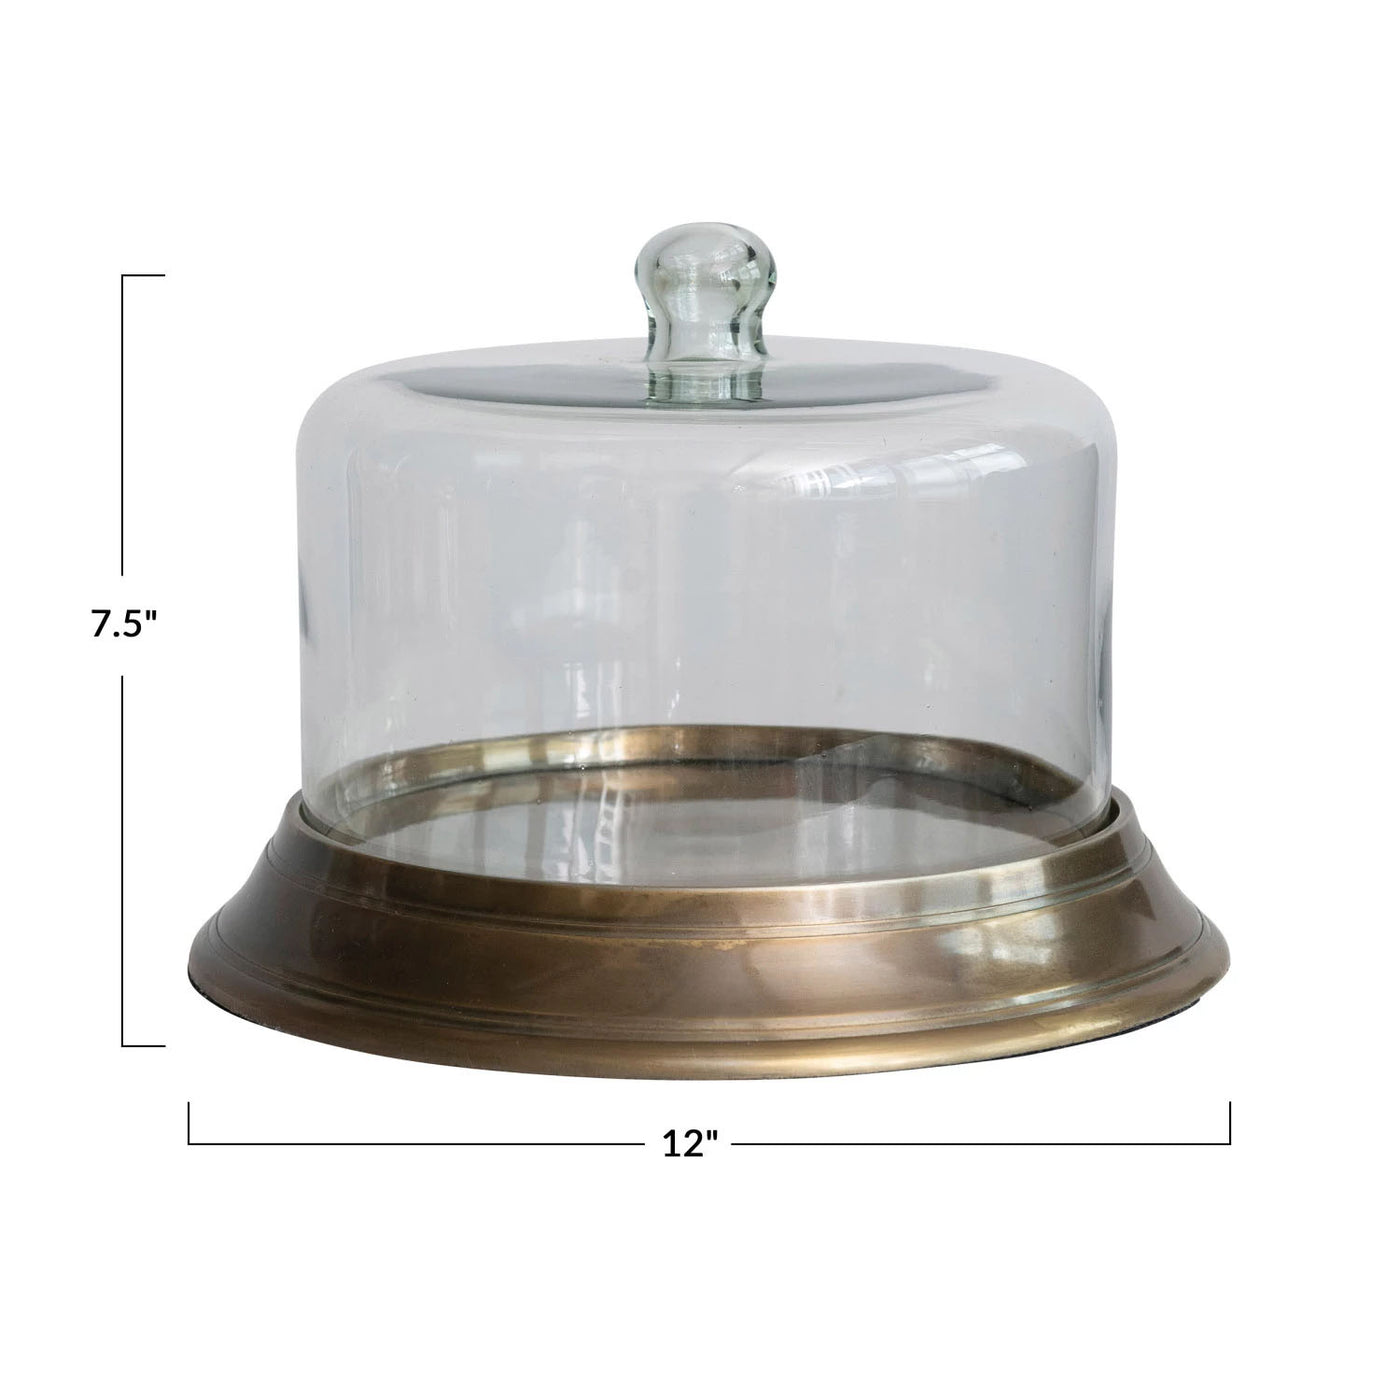 12" Round Glass Cloche with Antique Brass Finished Base